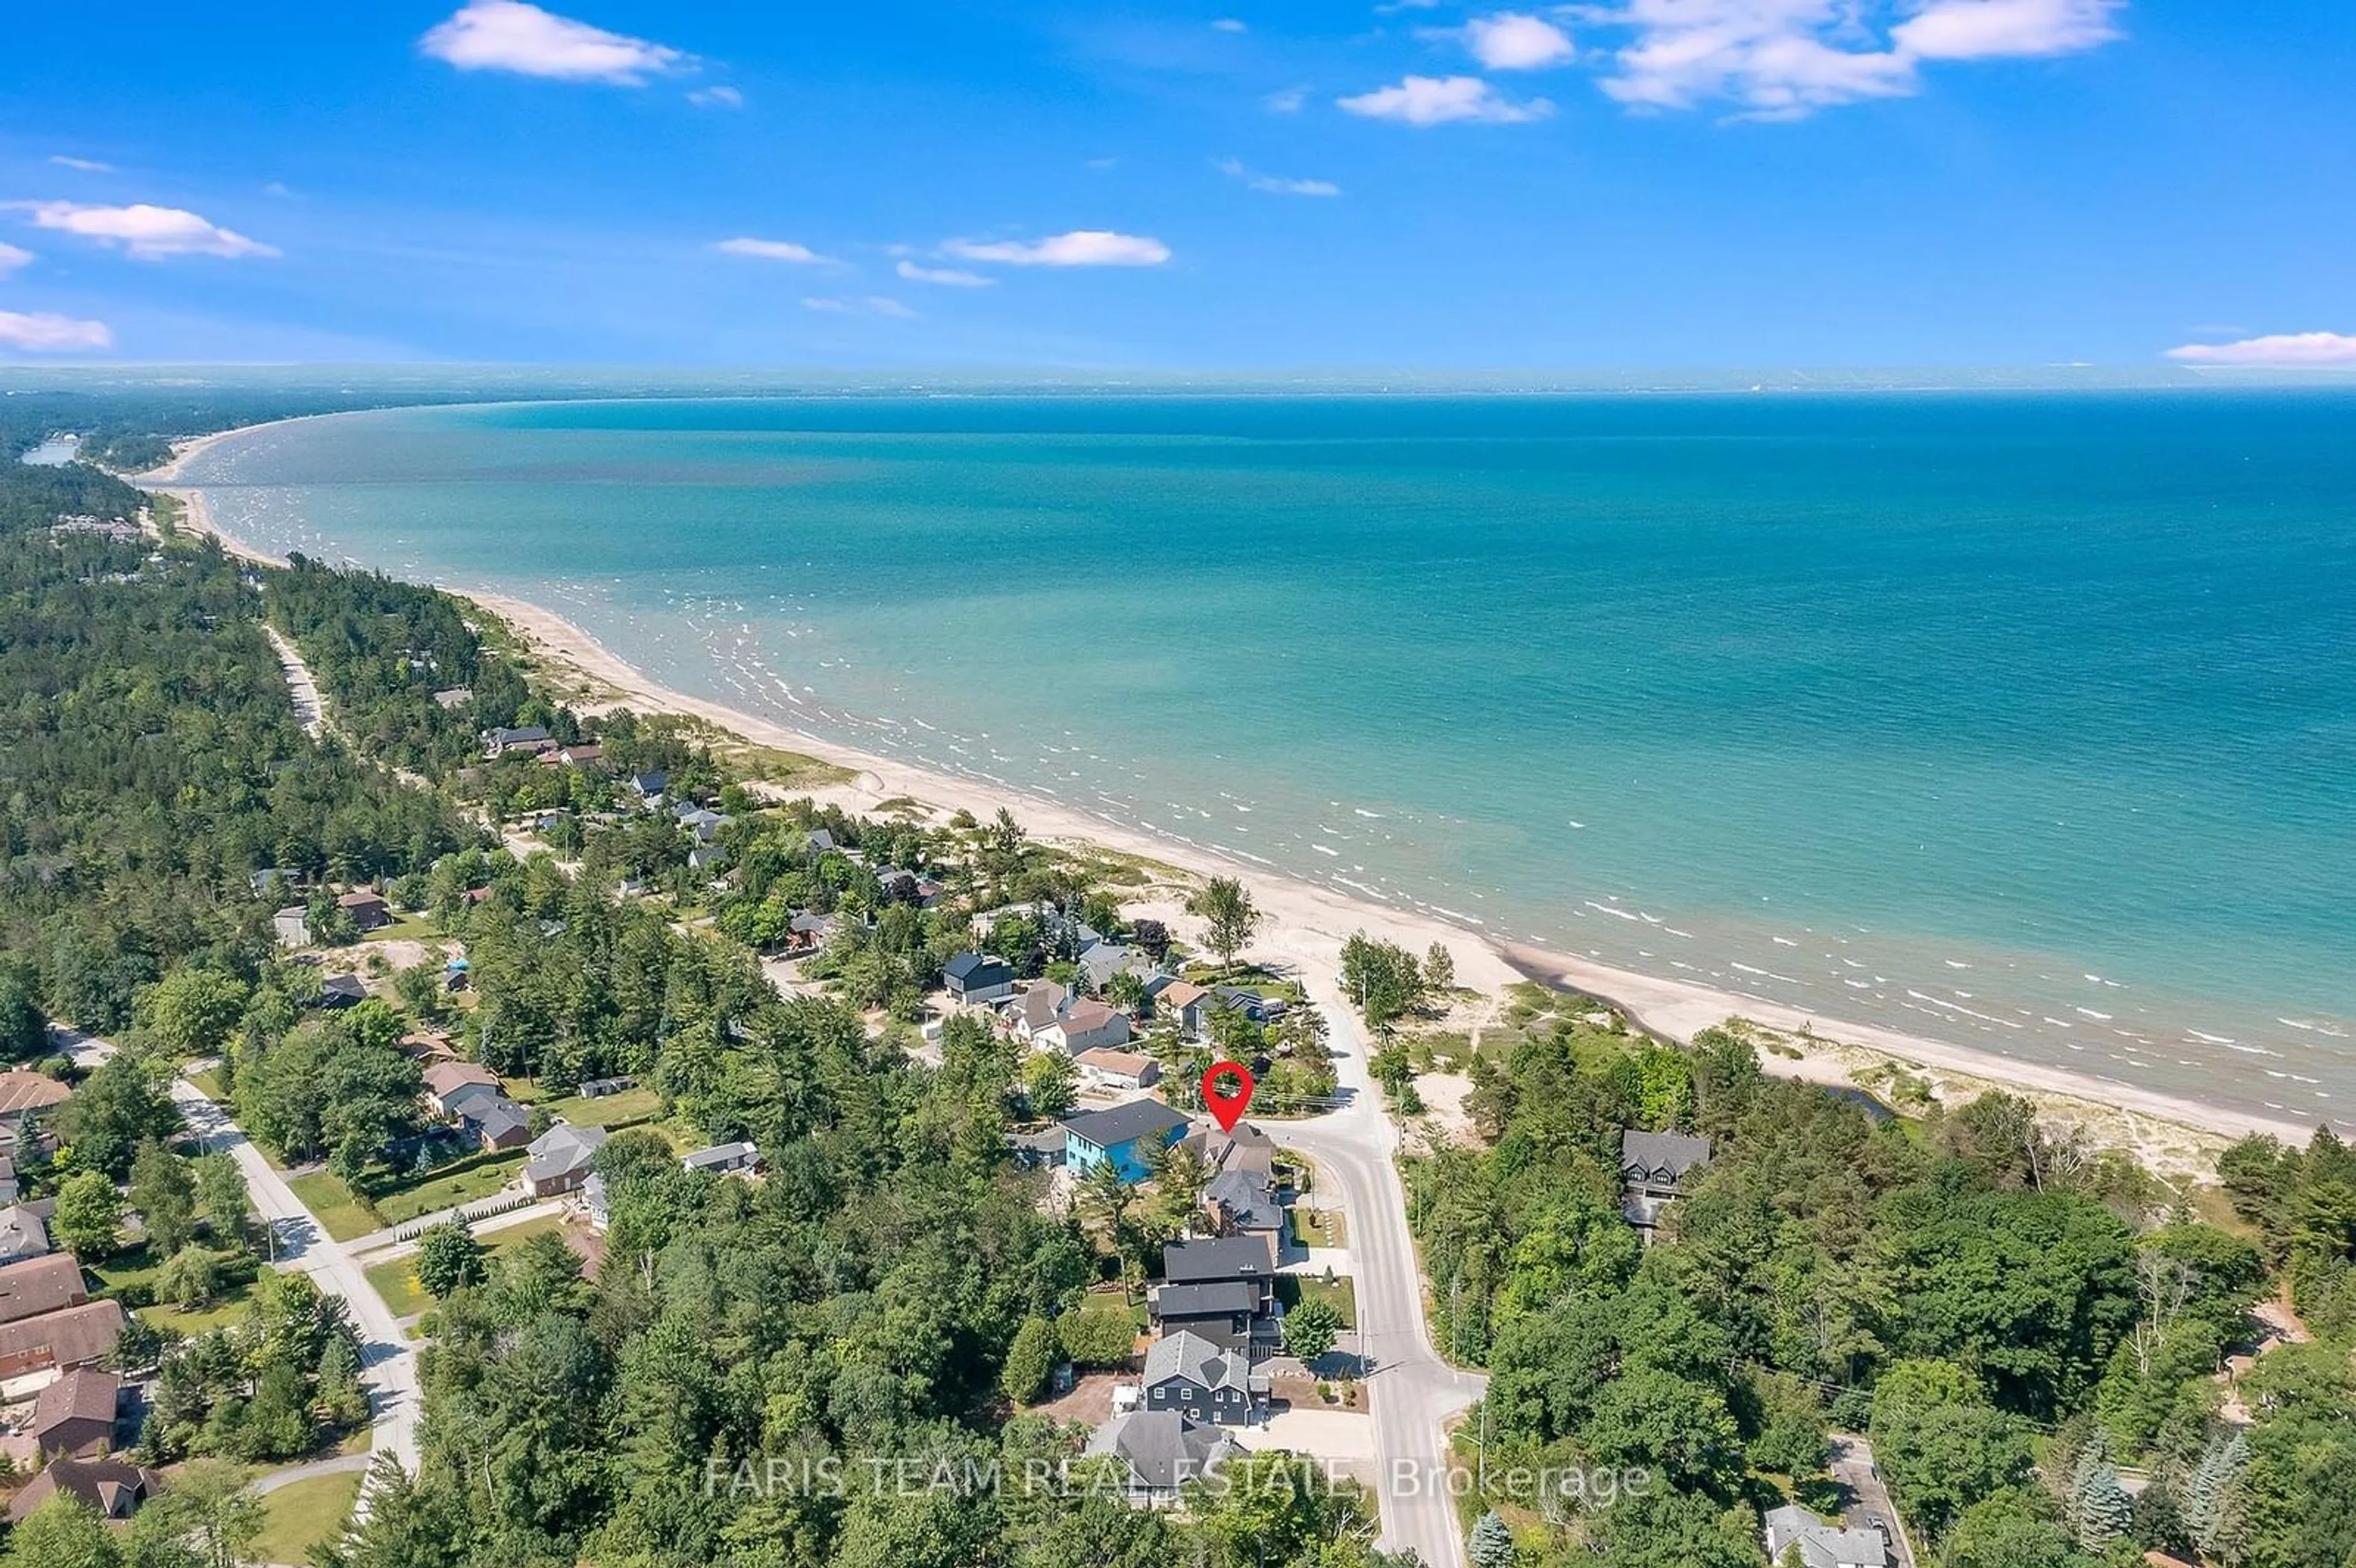 Lakeview for 805 Eastdale Dr, Wasaga Beach Ontario L9Z 2R5